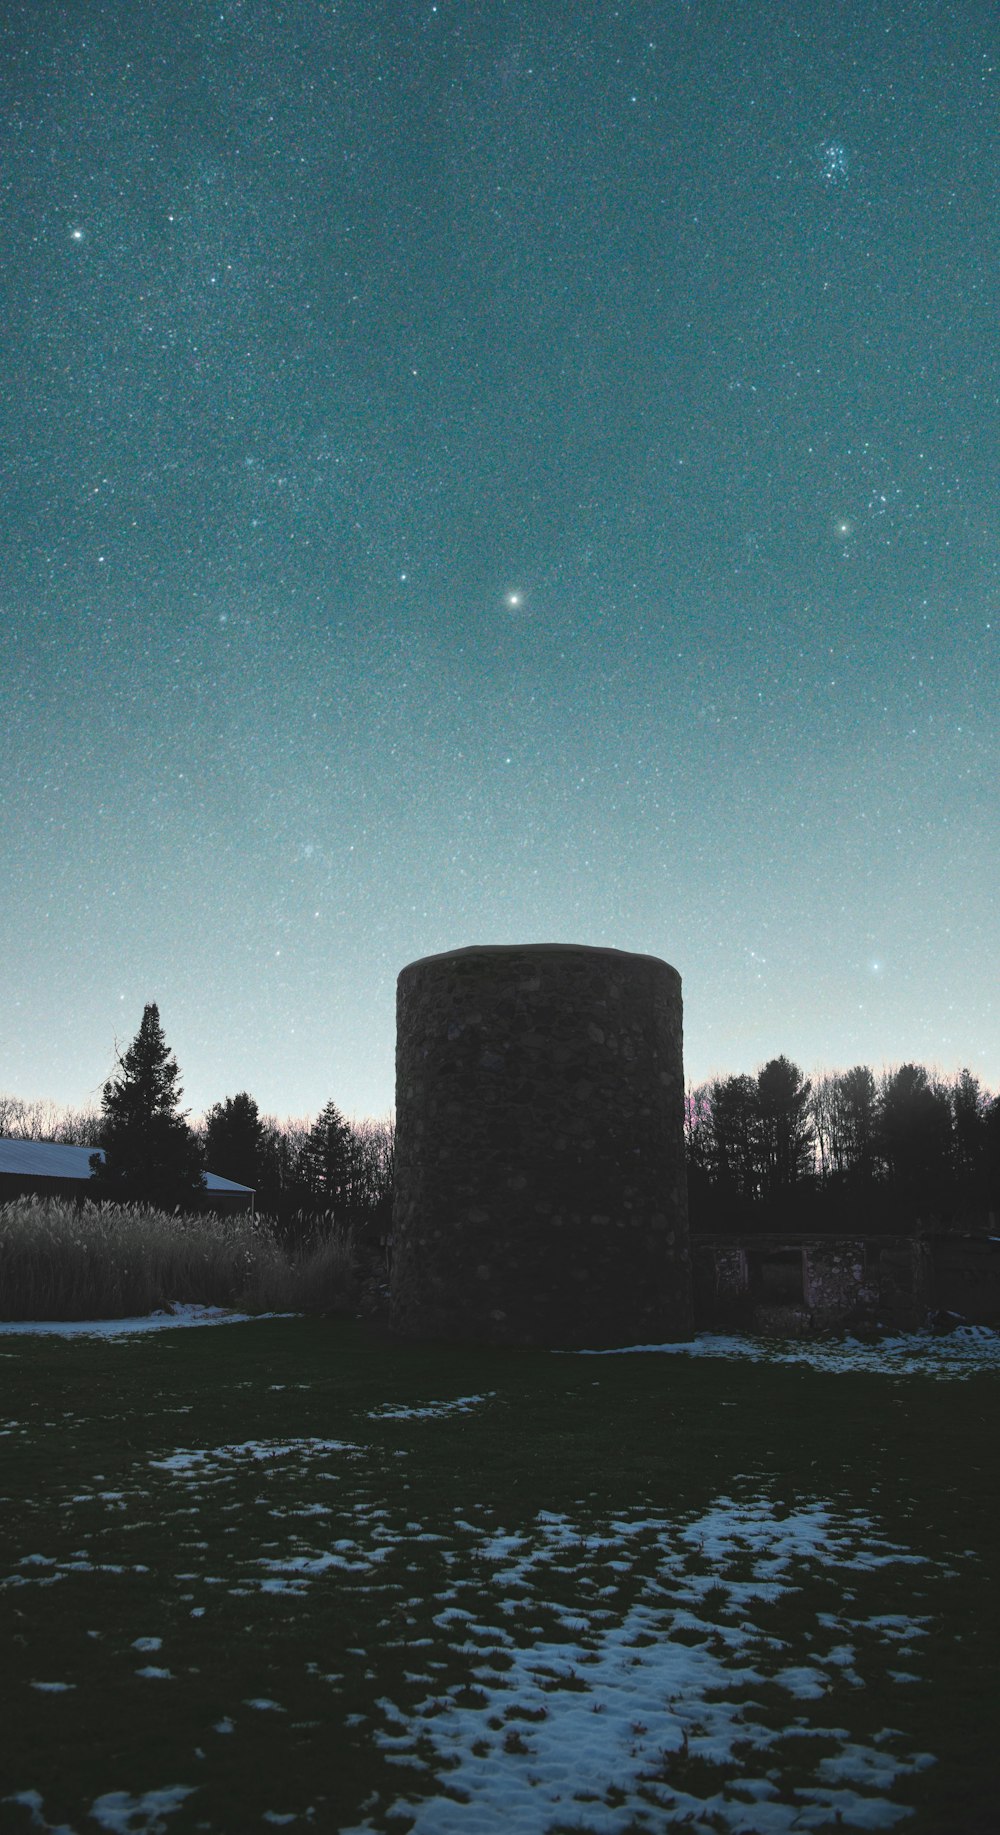 the night sky with stars above a round structure